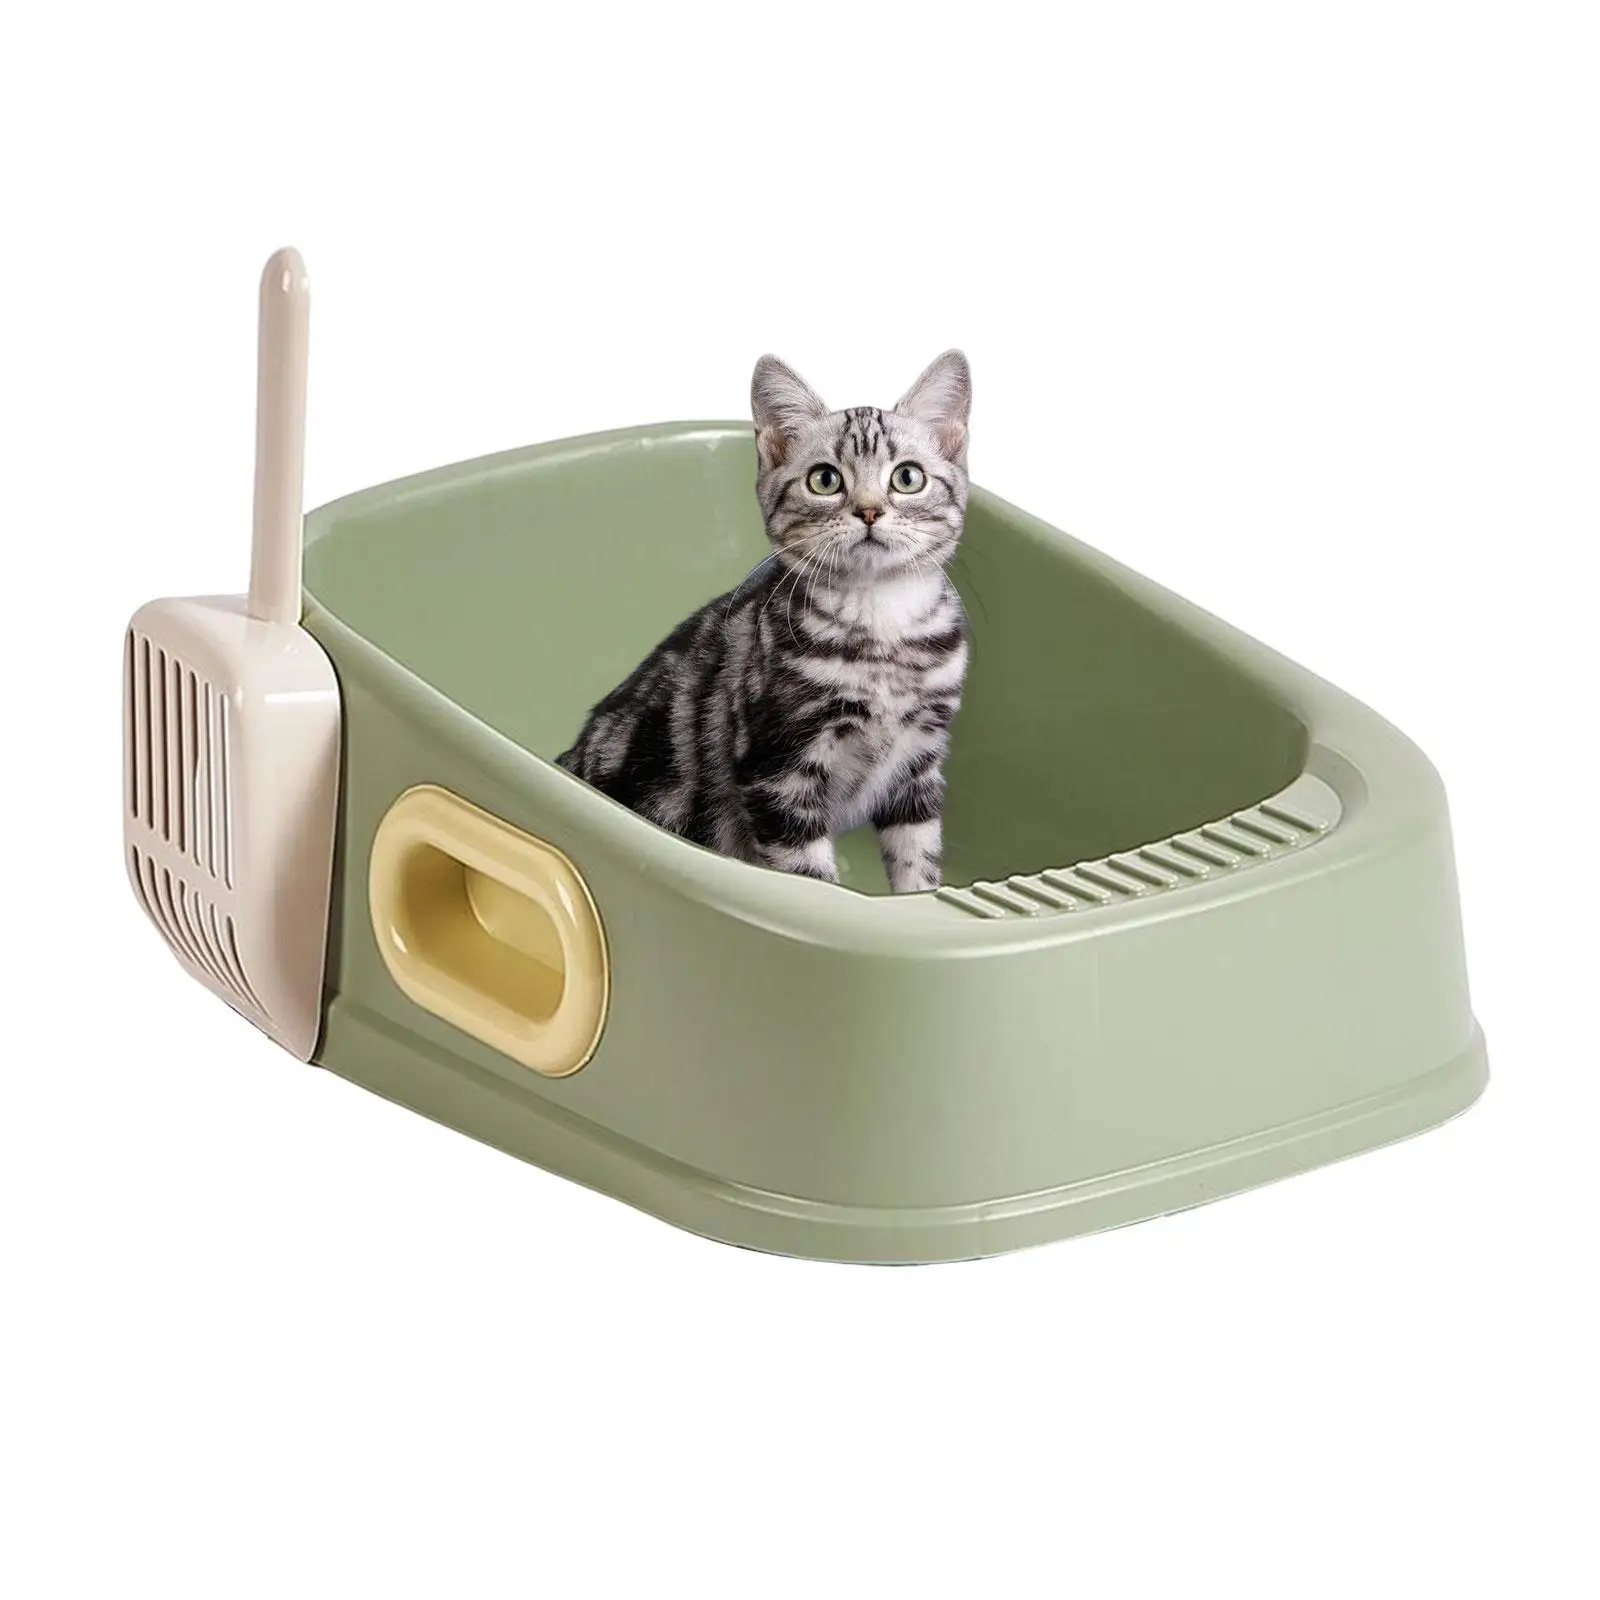 Cat Litter Box Kitty Litter Pan Prevent Sand Leakage Large Space Portable Semi Enclosed Bedpan Non Slip for Small Animals Rabbit